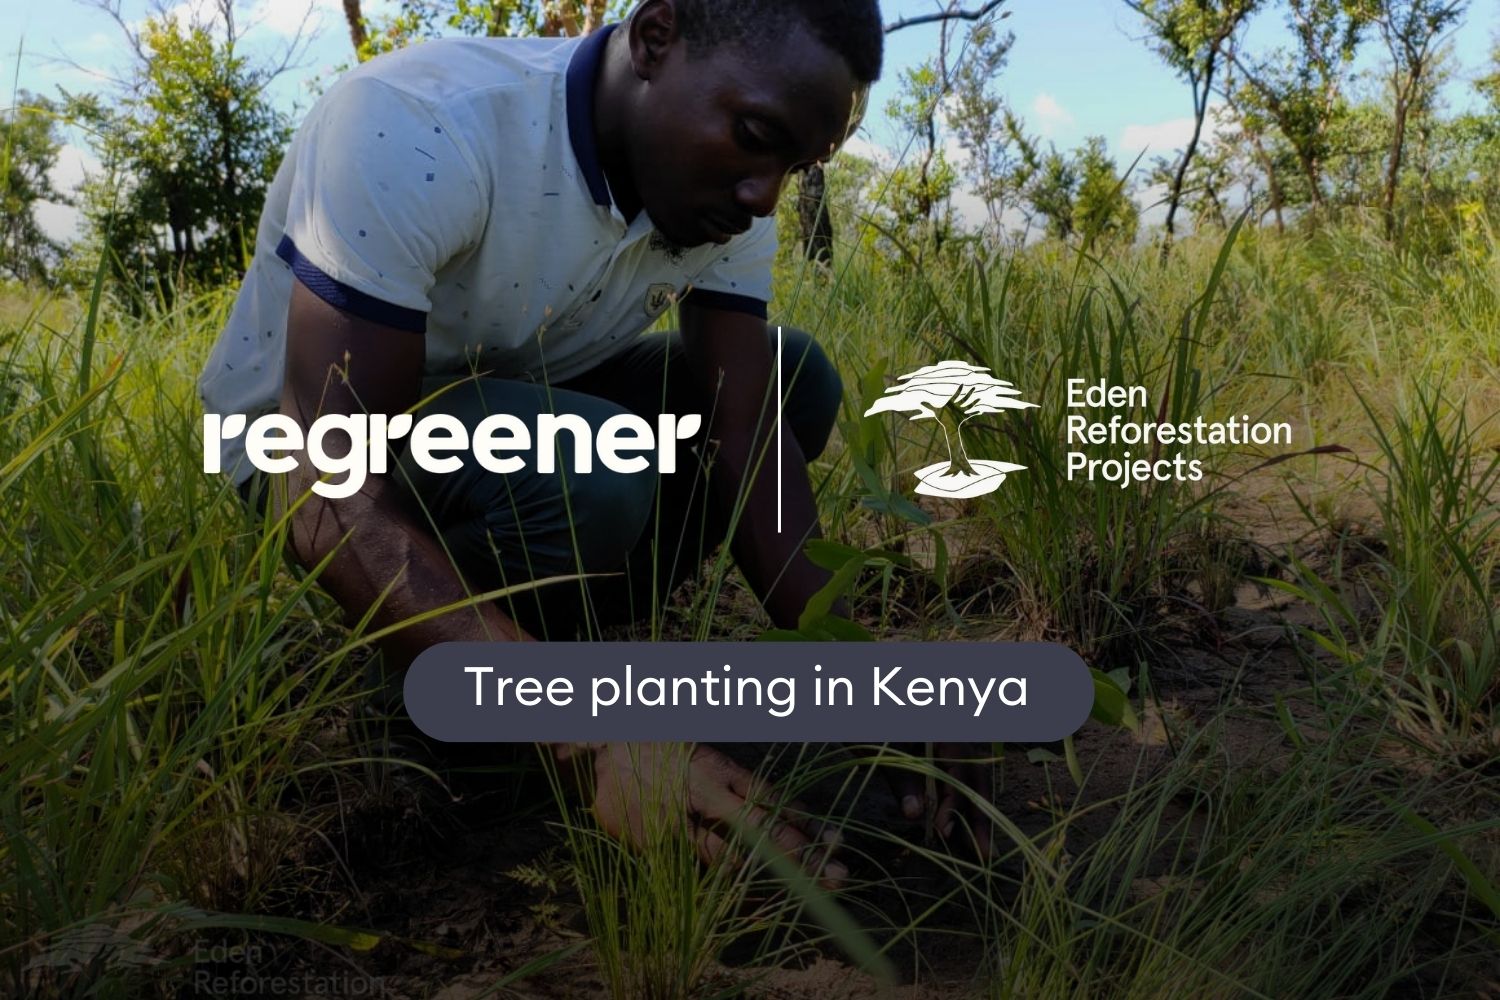 Local community planting trees in nature in Kenya